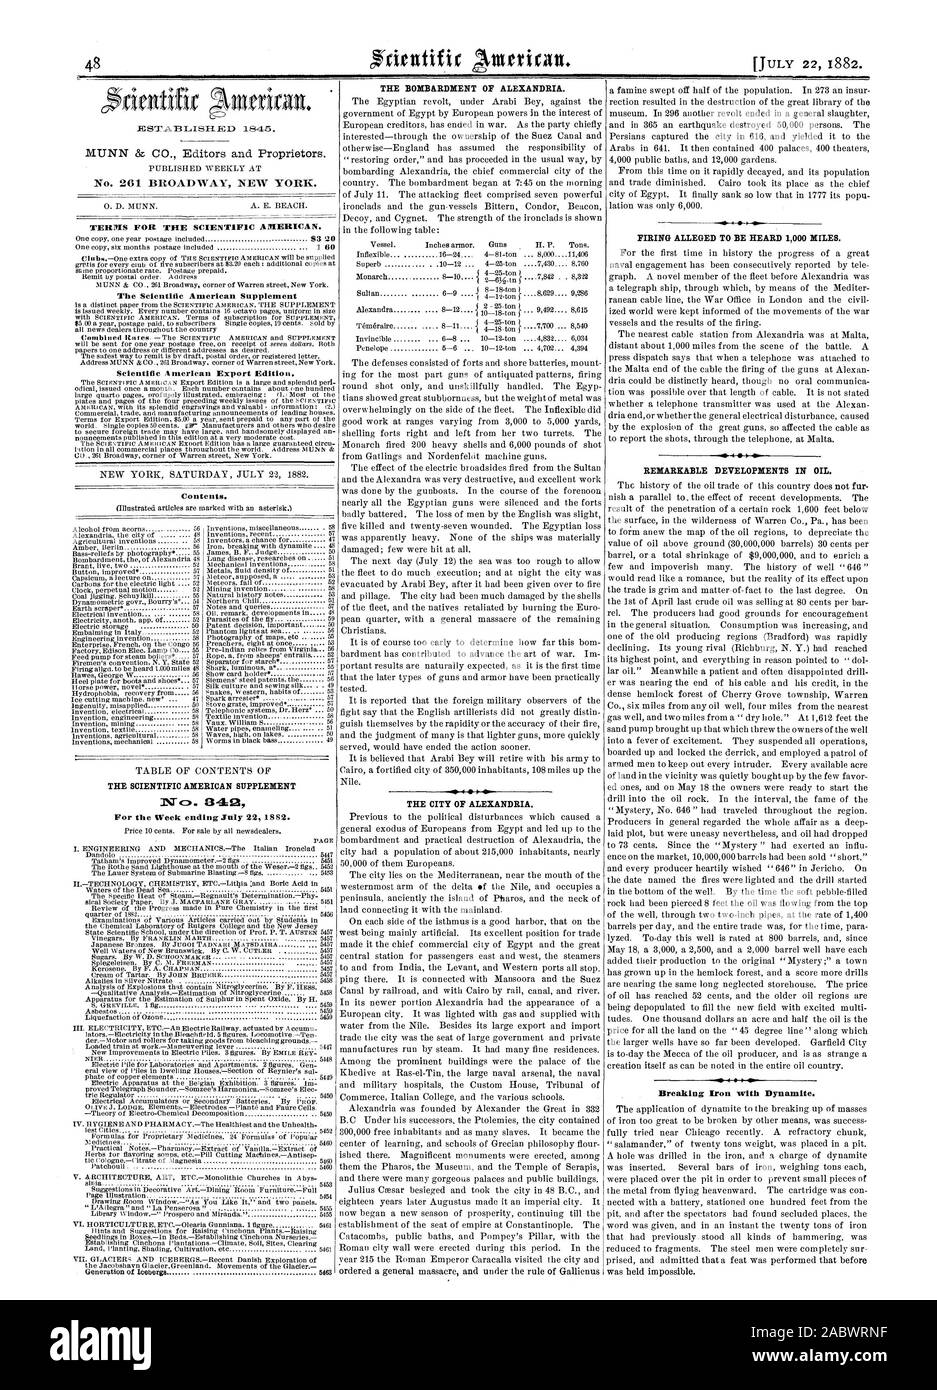 The Scientific American Supplement Scientific American Export Edition. Contents. THE SCIENTIFIC AMERICAN SUPPLEMENT N. 840 For the Week ending July 22 1882. THE BOMBARDMENT OF ALEXANDRIA. THE CITY OF ALEXANDRIA. FIRING ALLEGED TO BE HEARD 1000 MILES. REMARKABLE DEVELOPMENTS IN OIL. Breaking Iron with Dynamite., 1882-07-22 Stock Photo